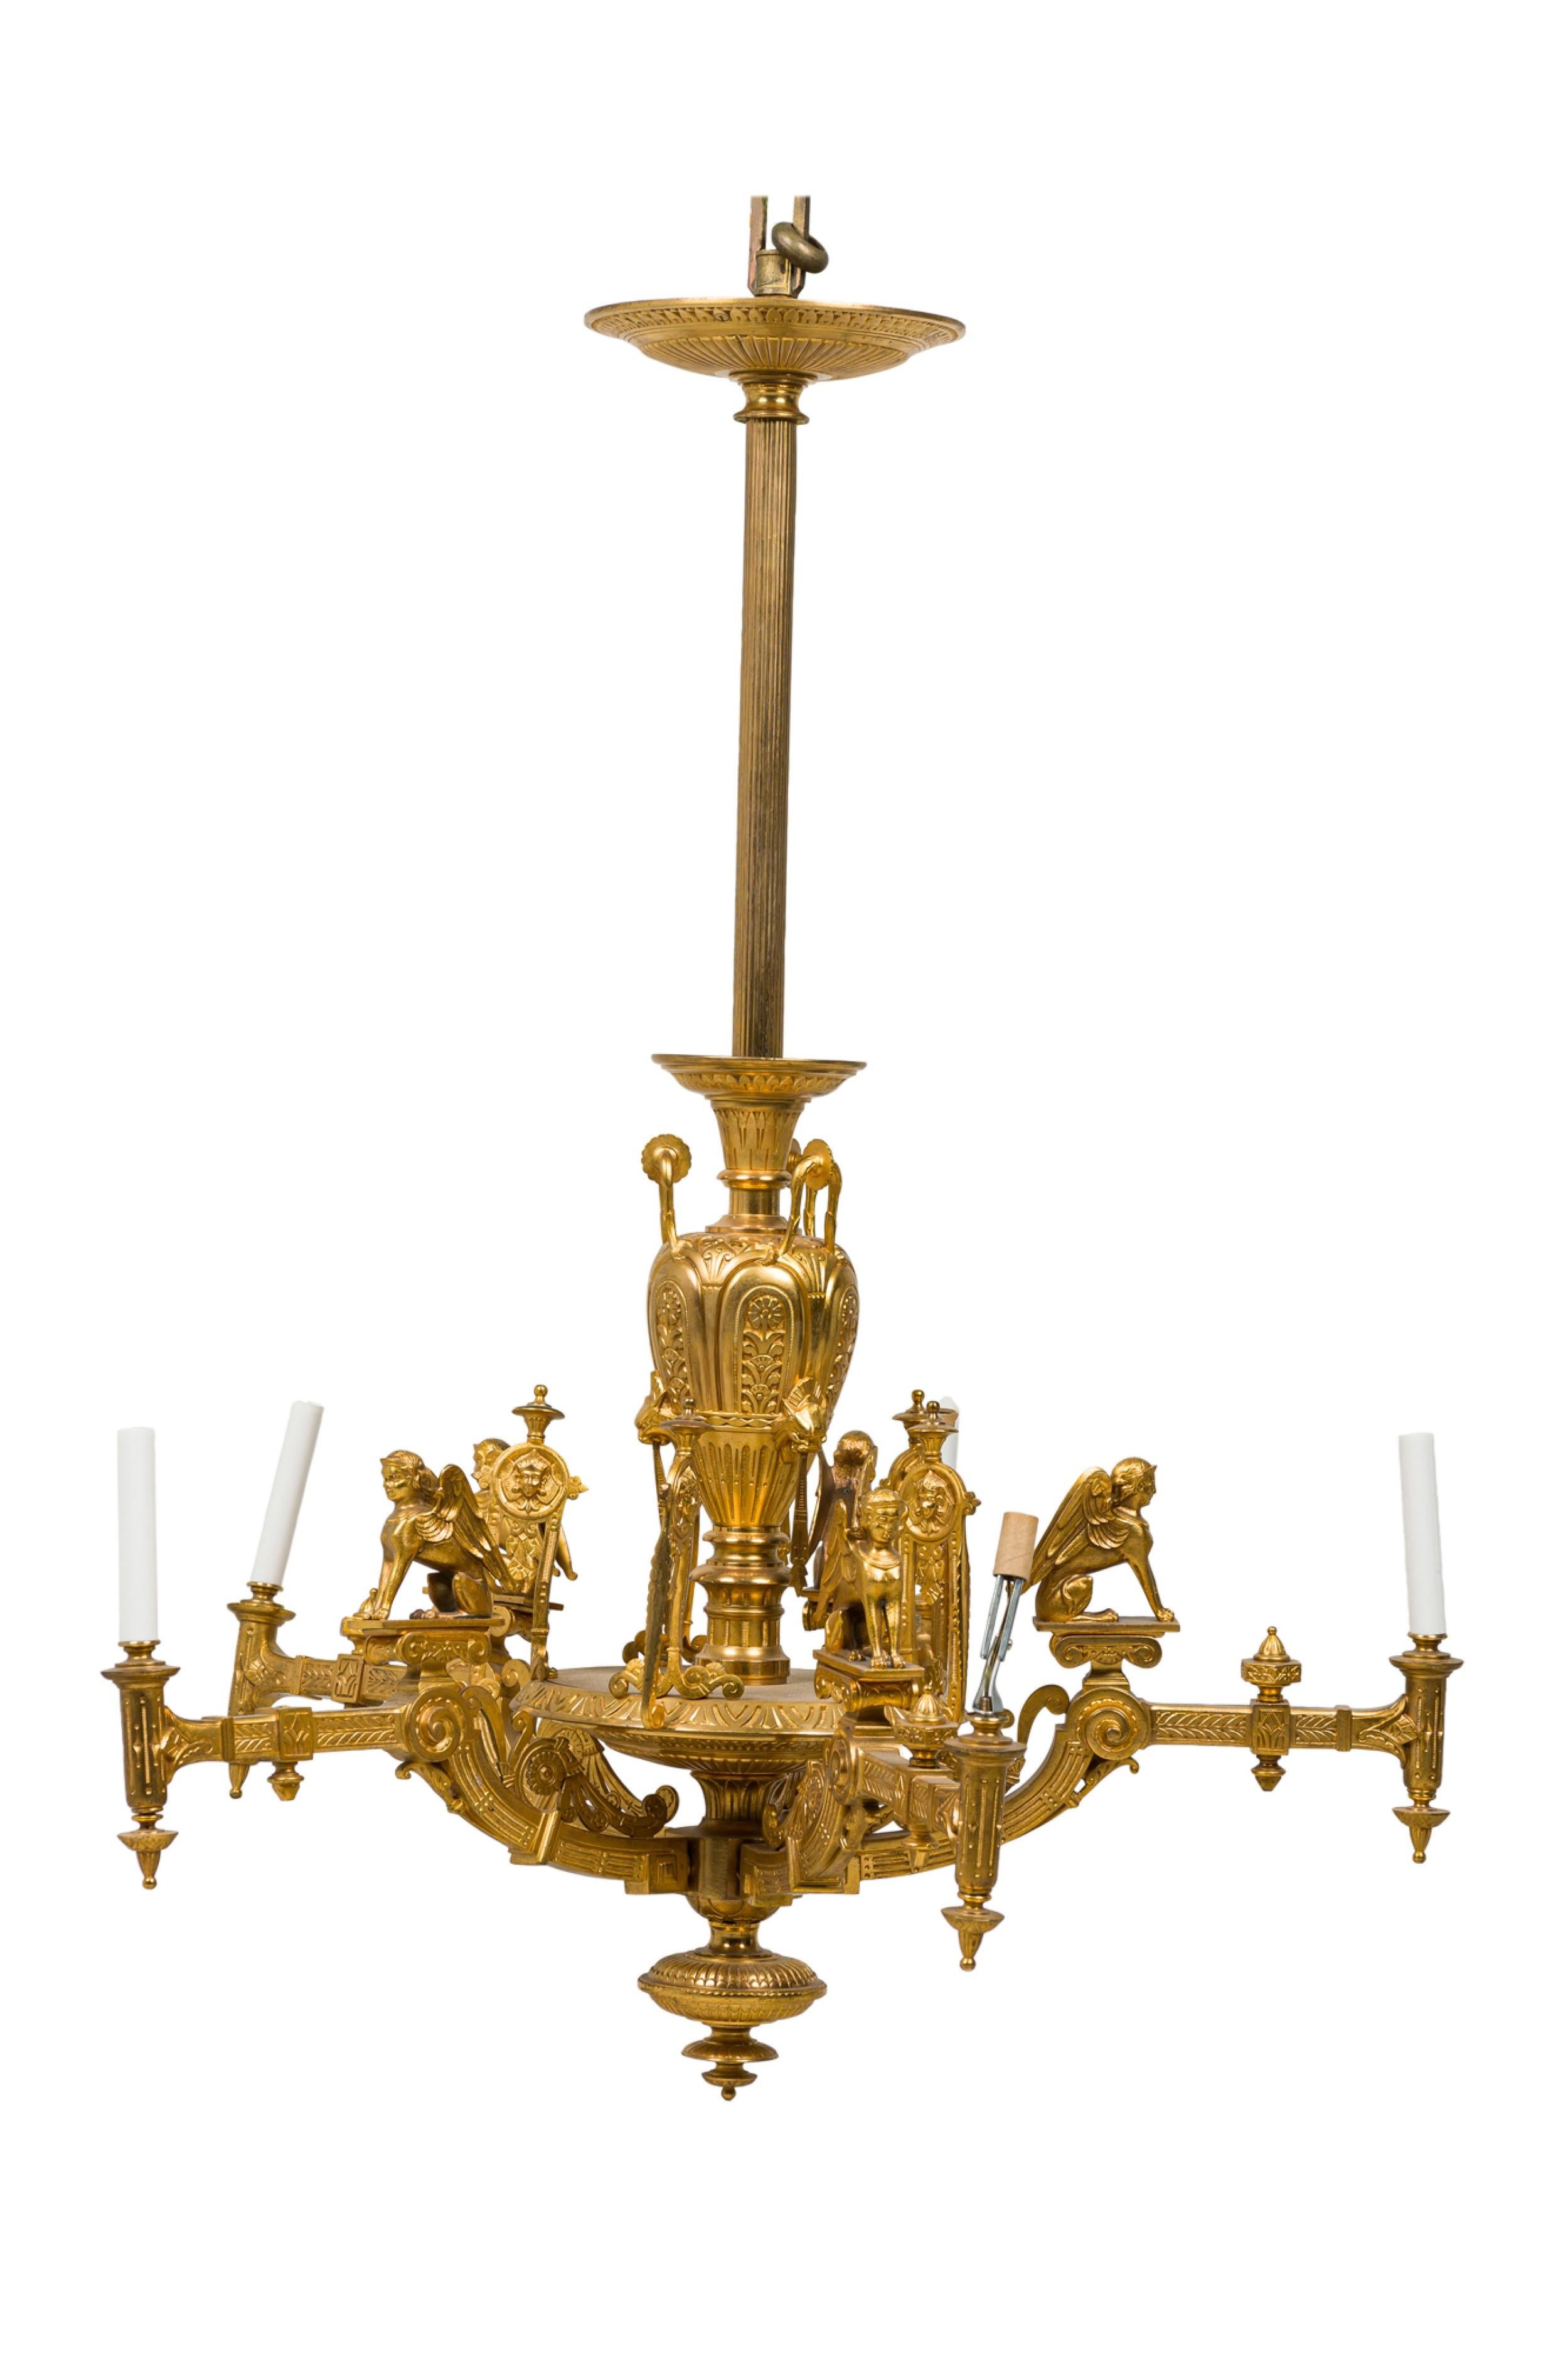 French Empire Style (1880) gilt bronze 5-light chandelier in neo-classic form with sphinx figures, ancient urns, medallion heads and multi-patterned reserves.
